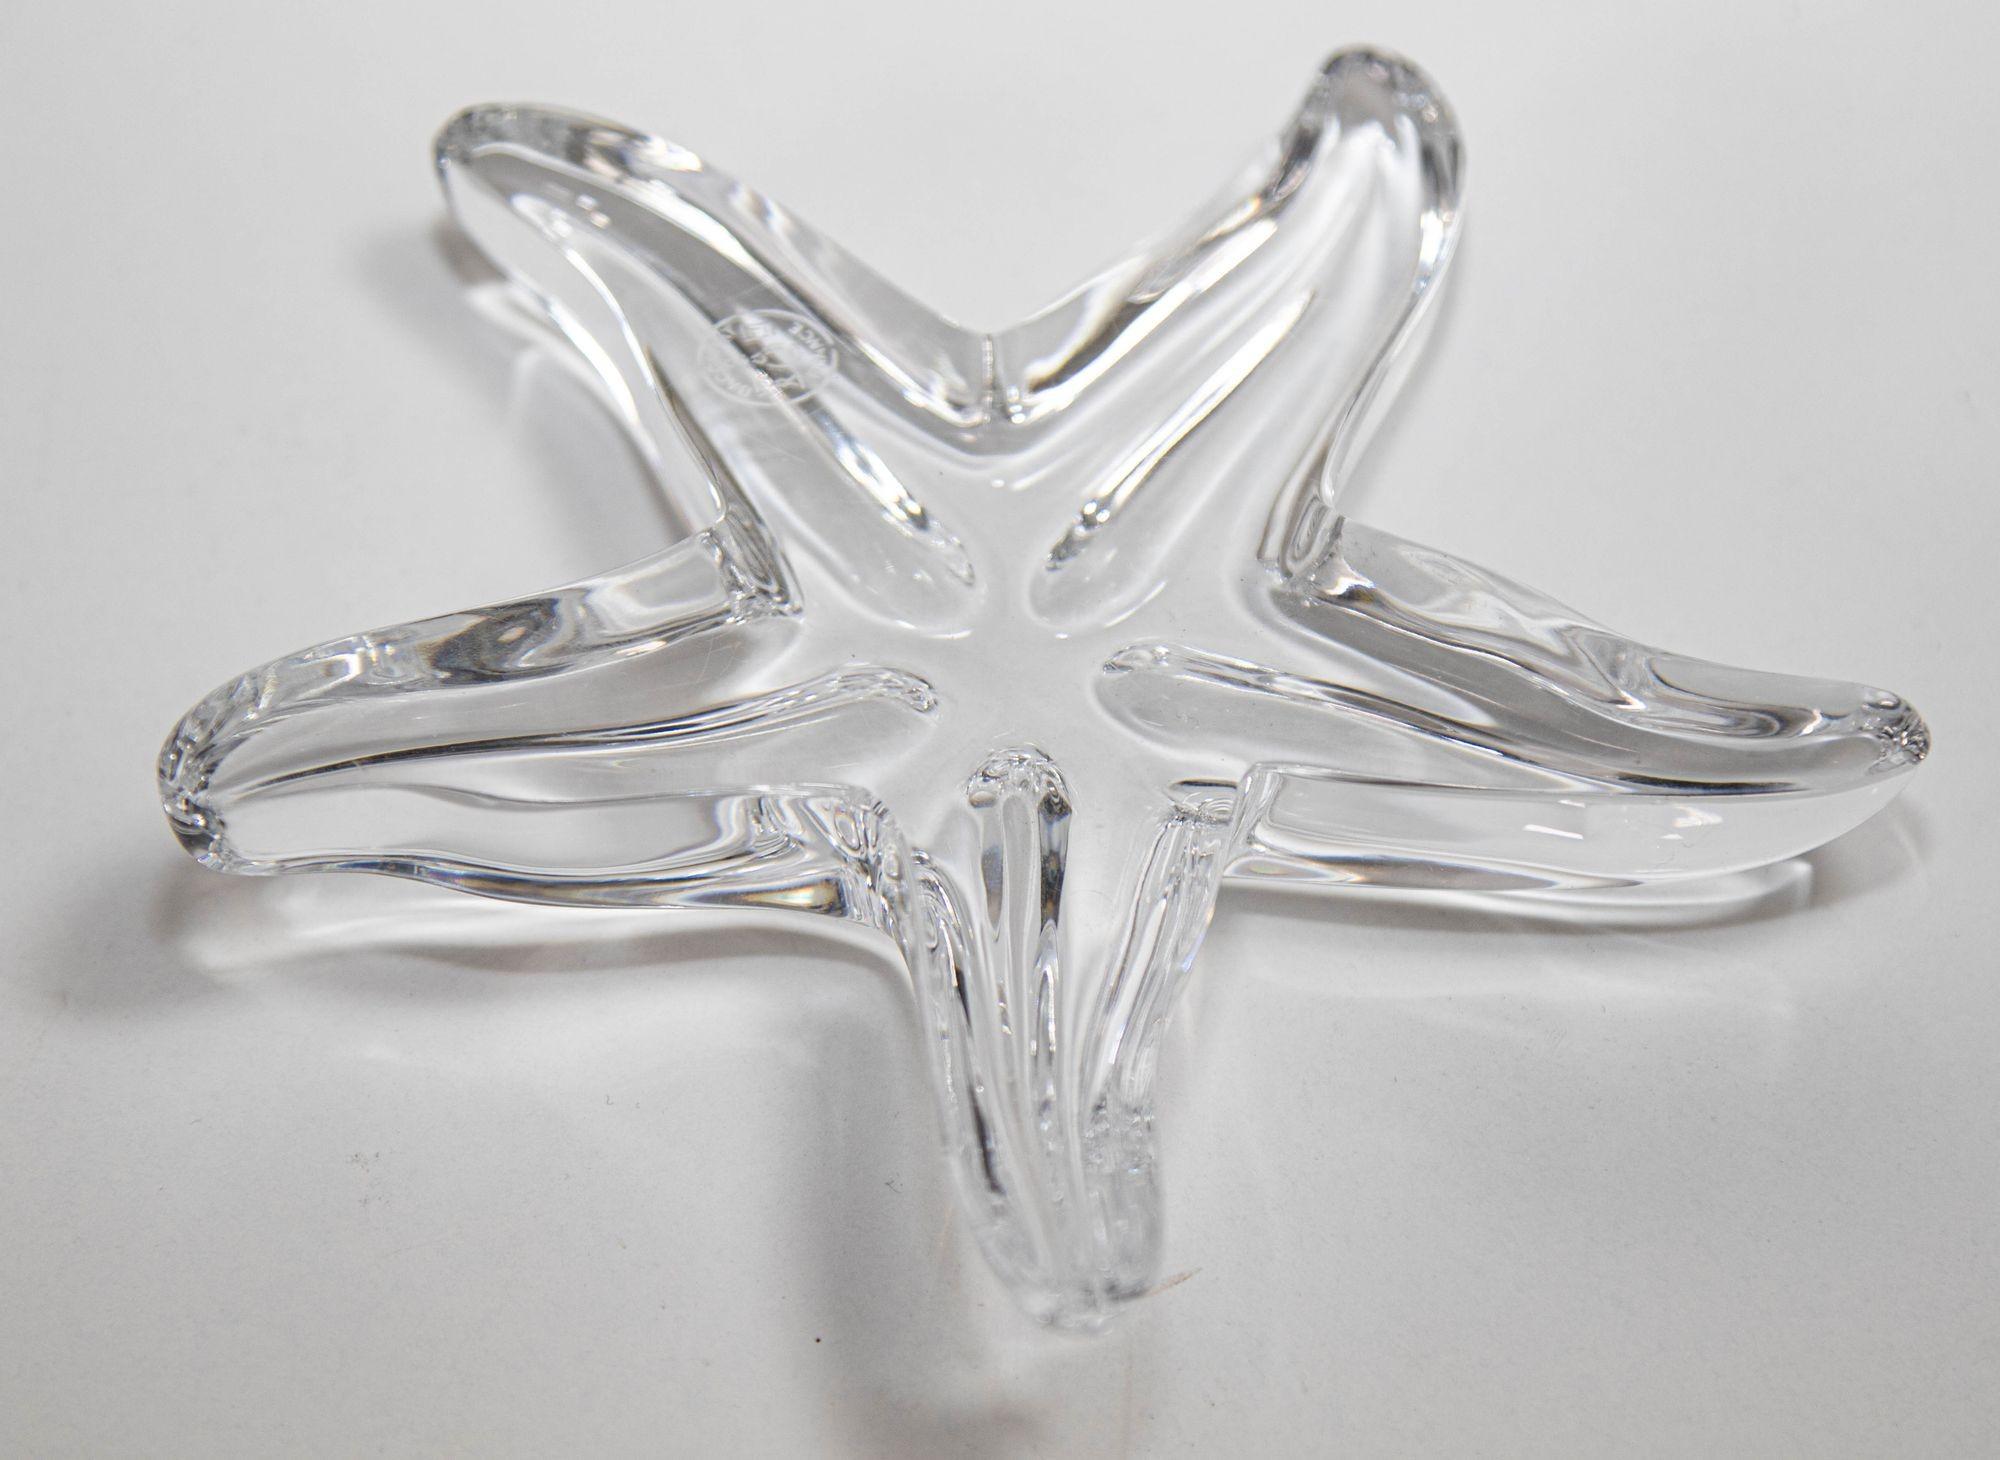 Organic Modern BACCARAT France Crystal Starfish Paperweight Art Glass 1970s For Sale